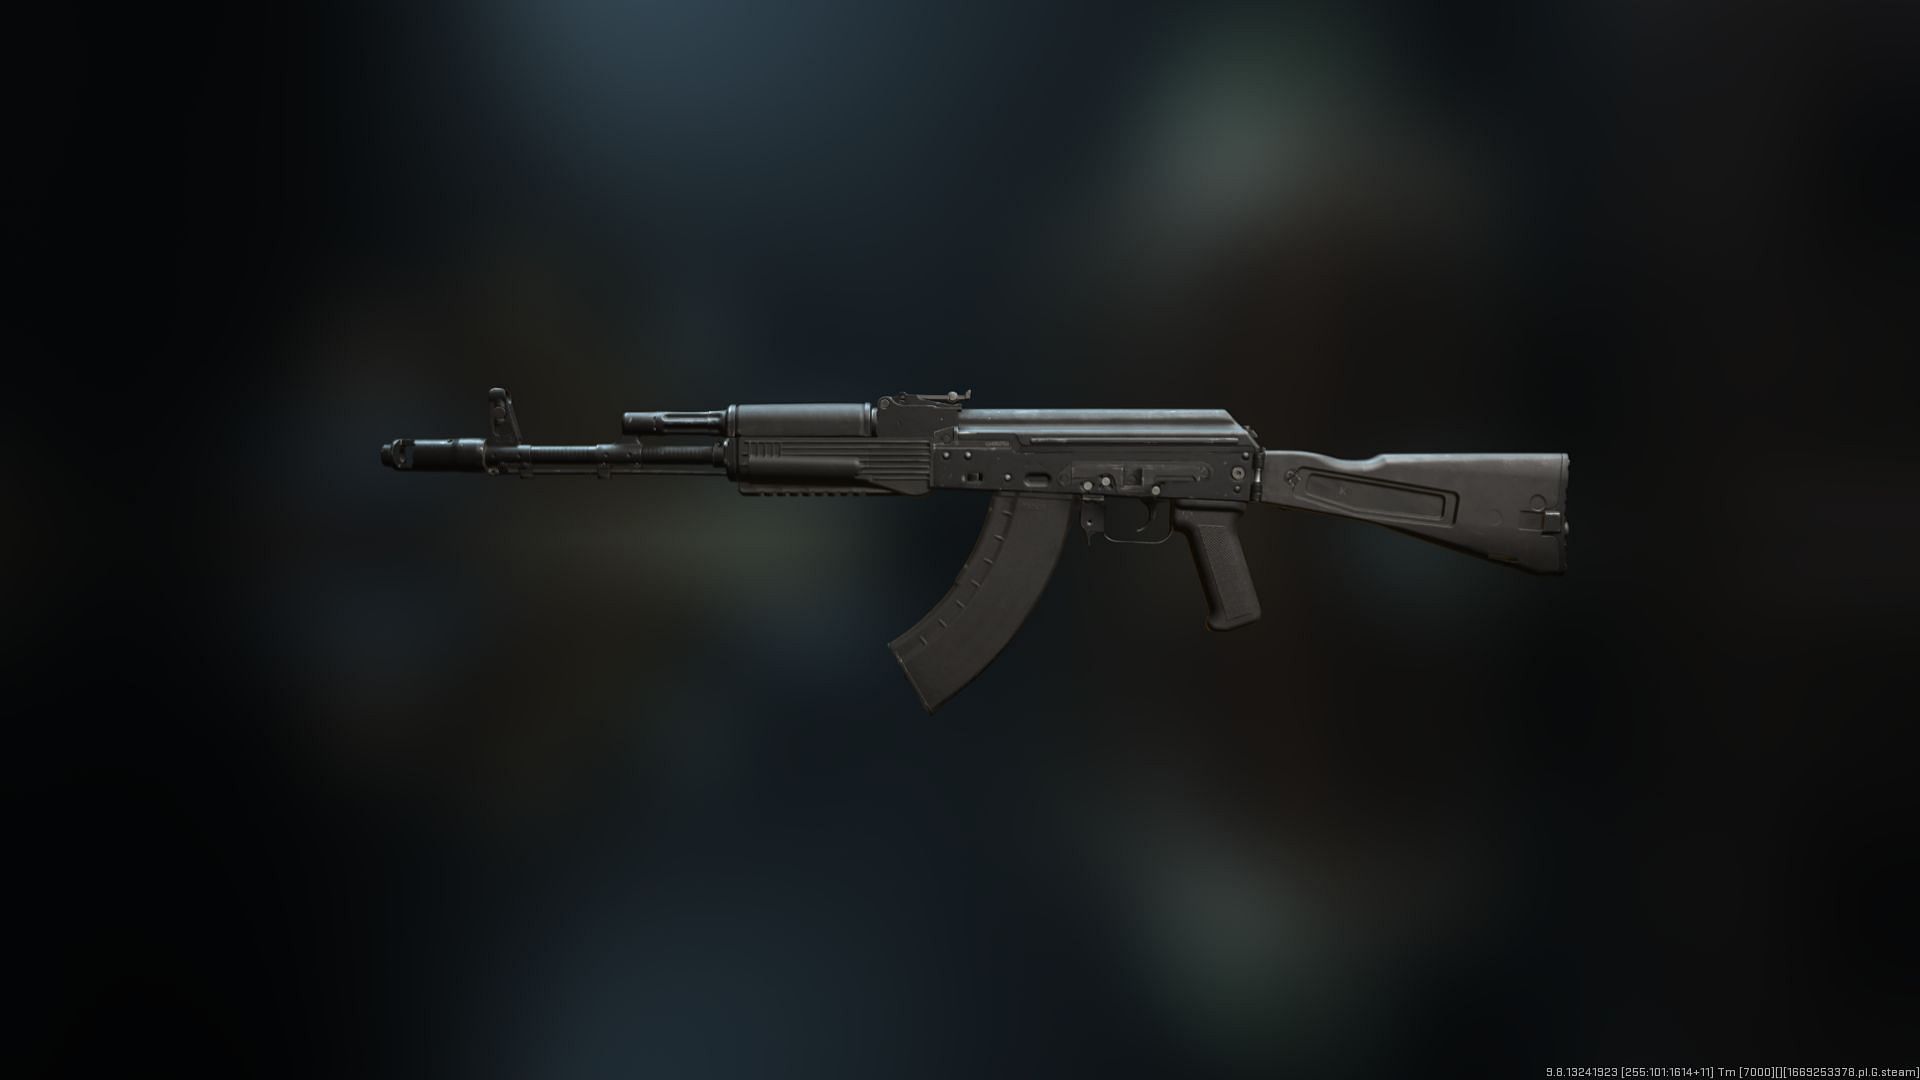 The Kastov-762 assault rifle in Modern Warfare 2 and Warzone 2 (Image via Activision)